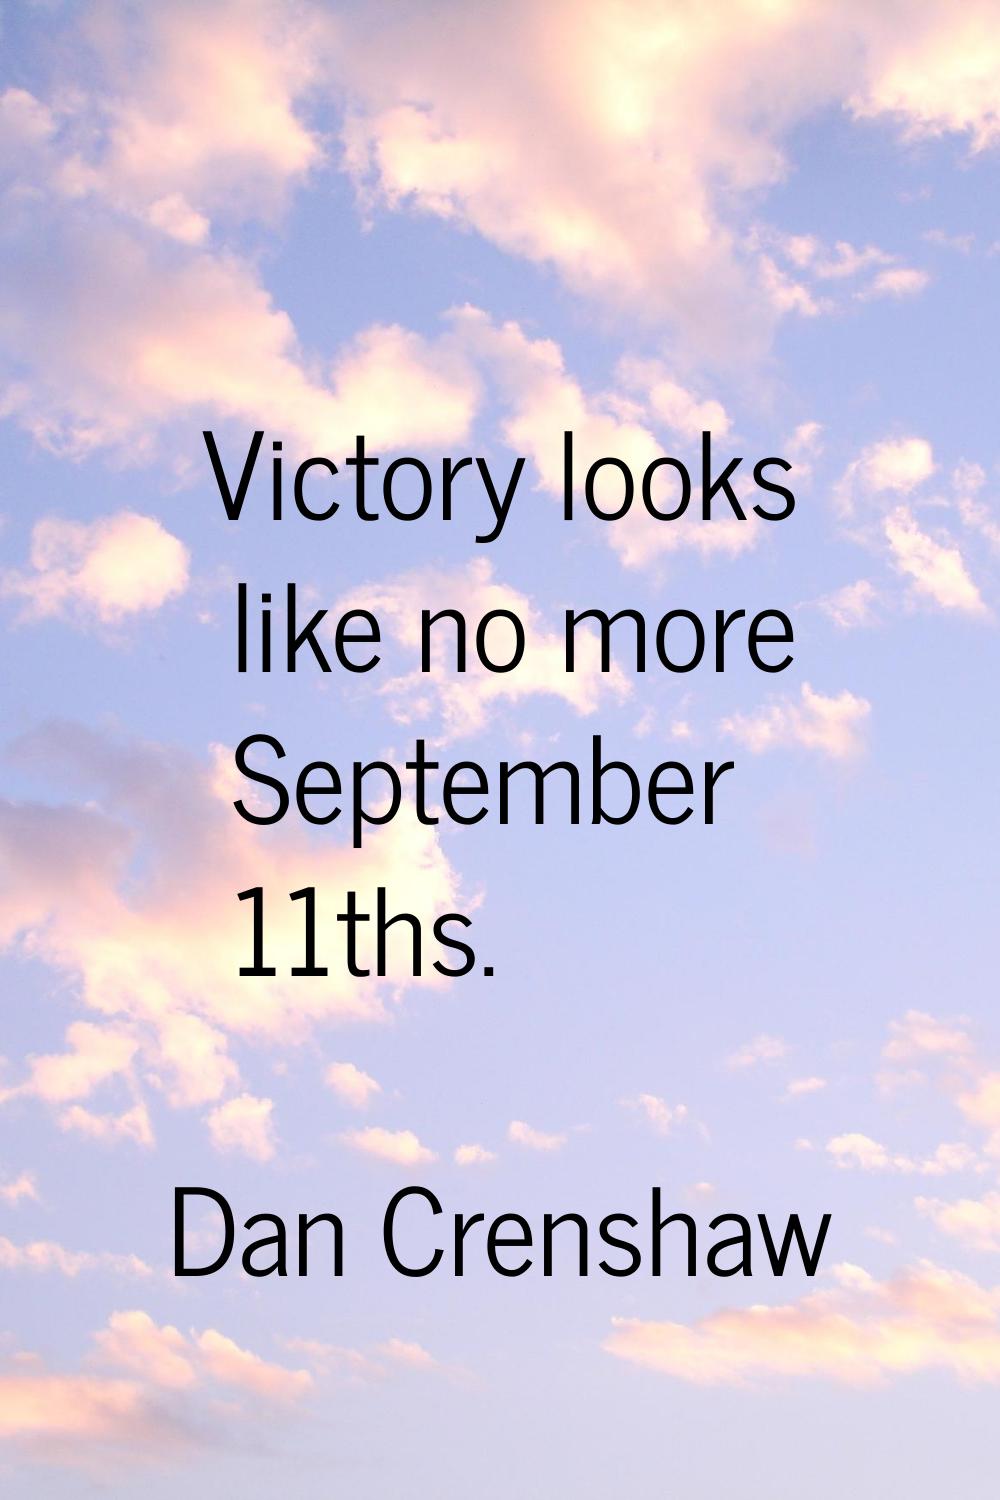 Victory looks like no more September 11ths.